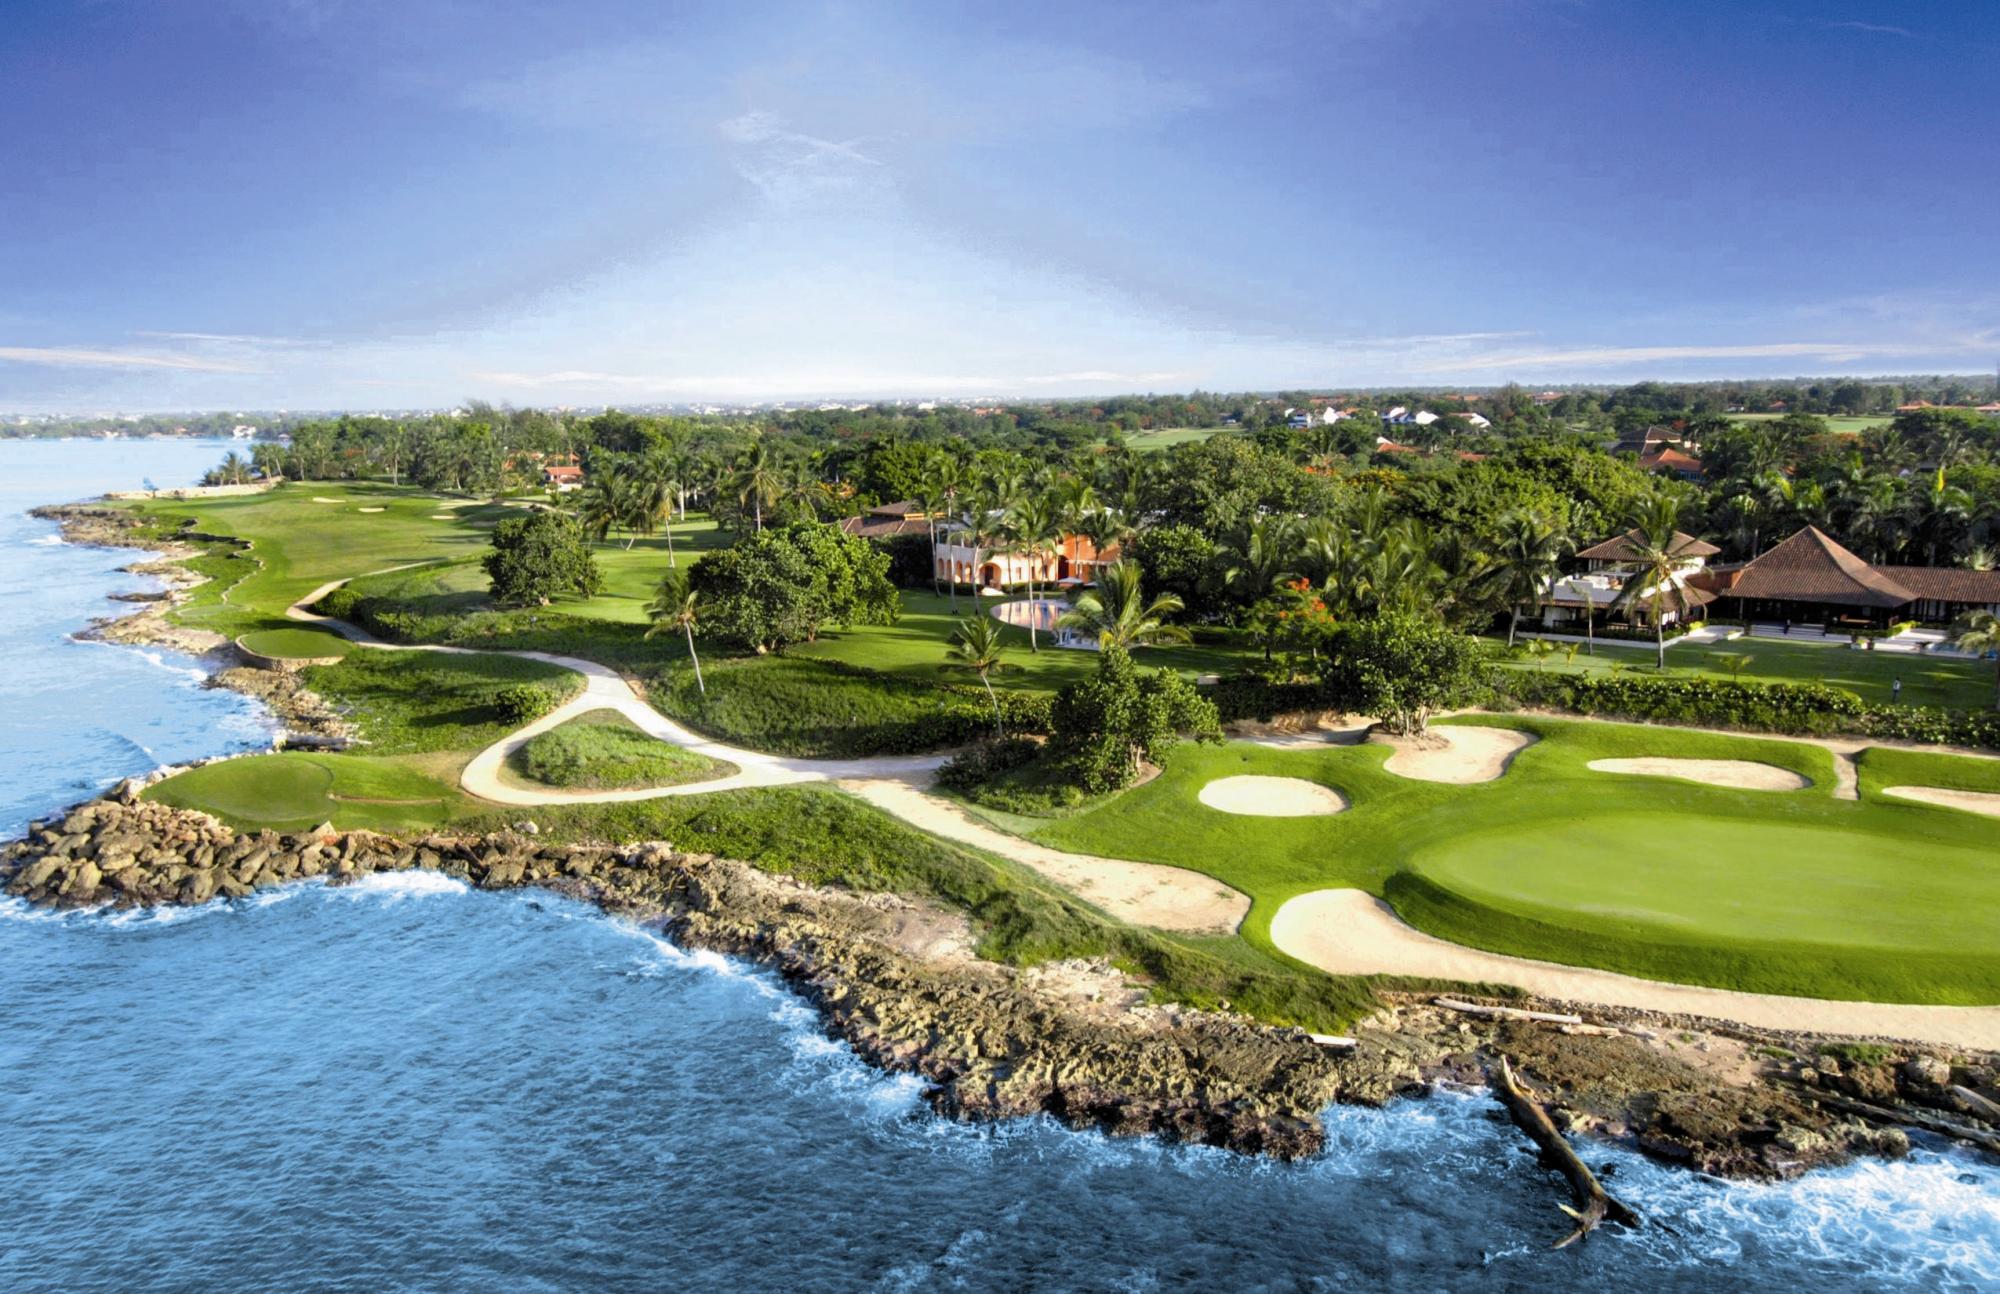 View Casa De Campo Golf - Teeth of the Dog Course's scenic gardens situated in gorgeous Dominican Re